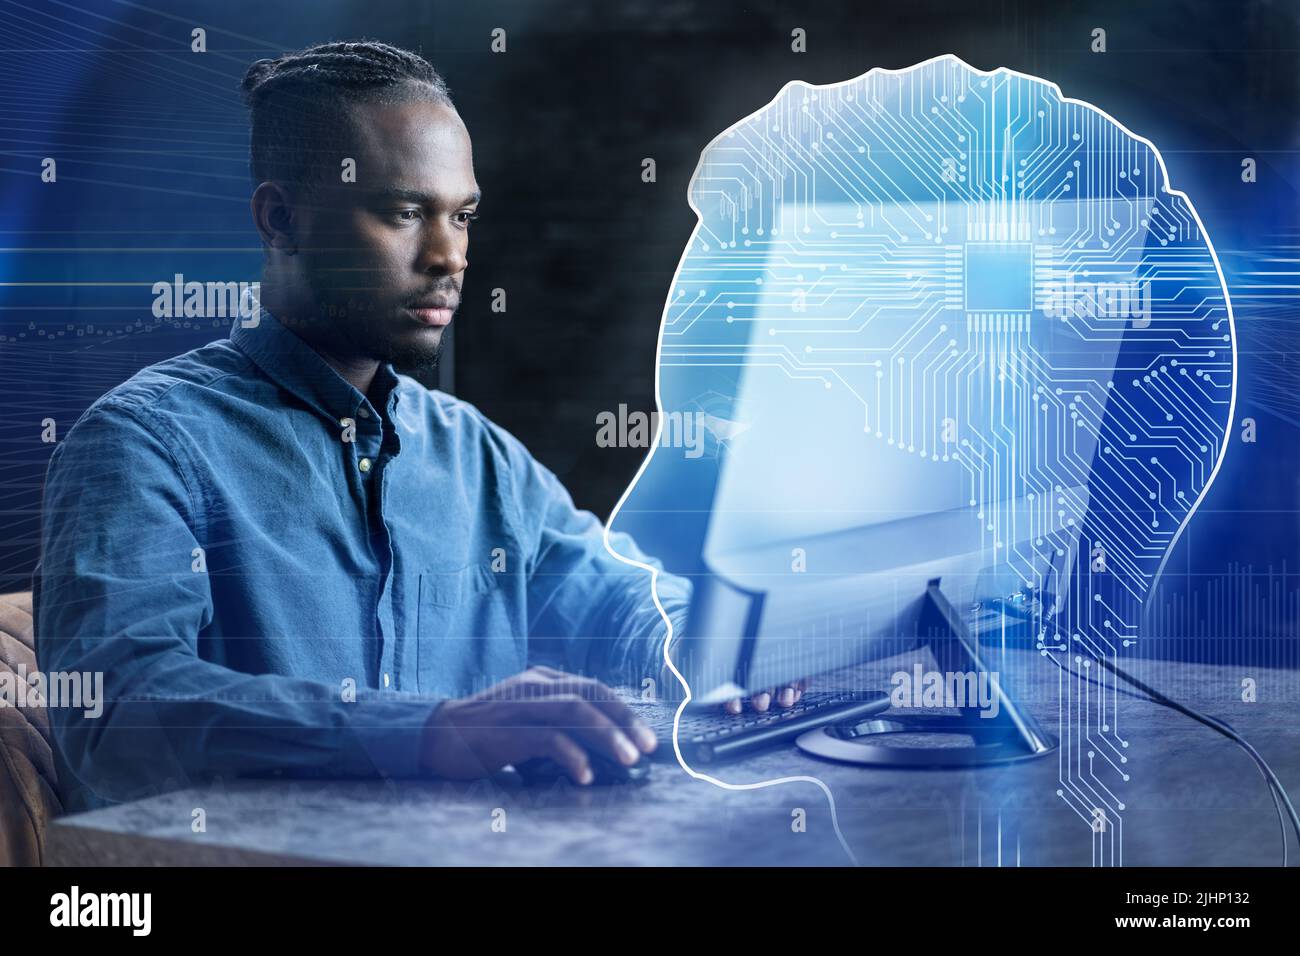 Financial Data Analyst Using AI Technology And Machine Learning Stock Photo